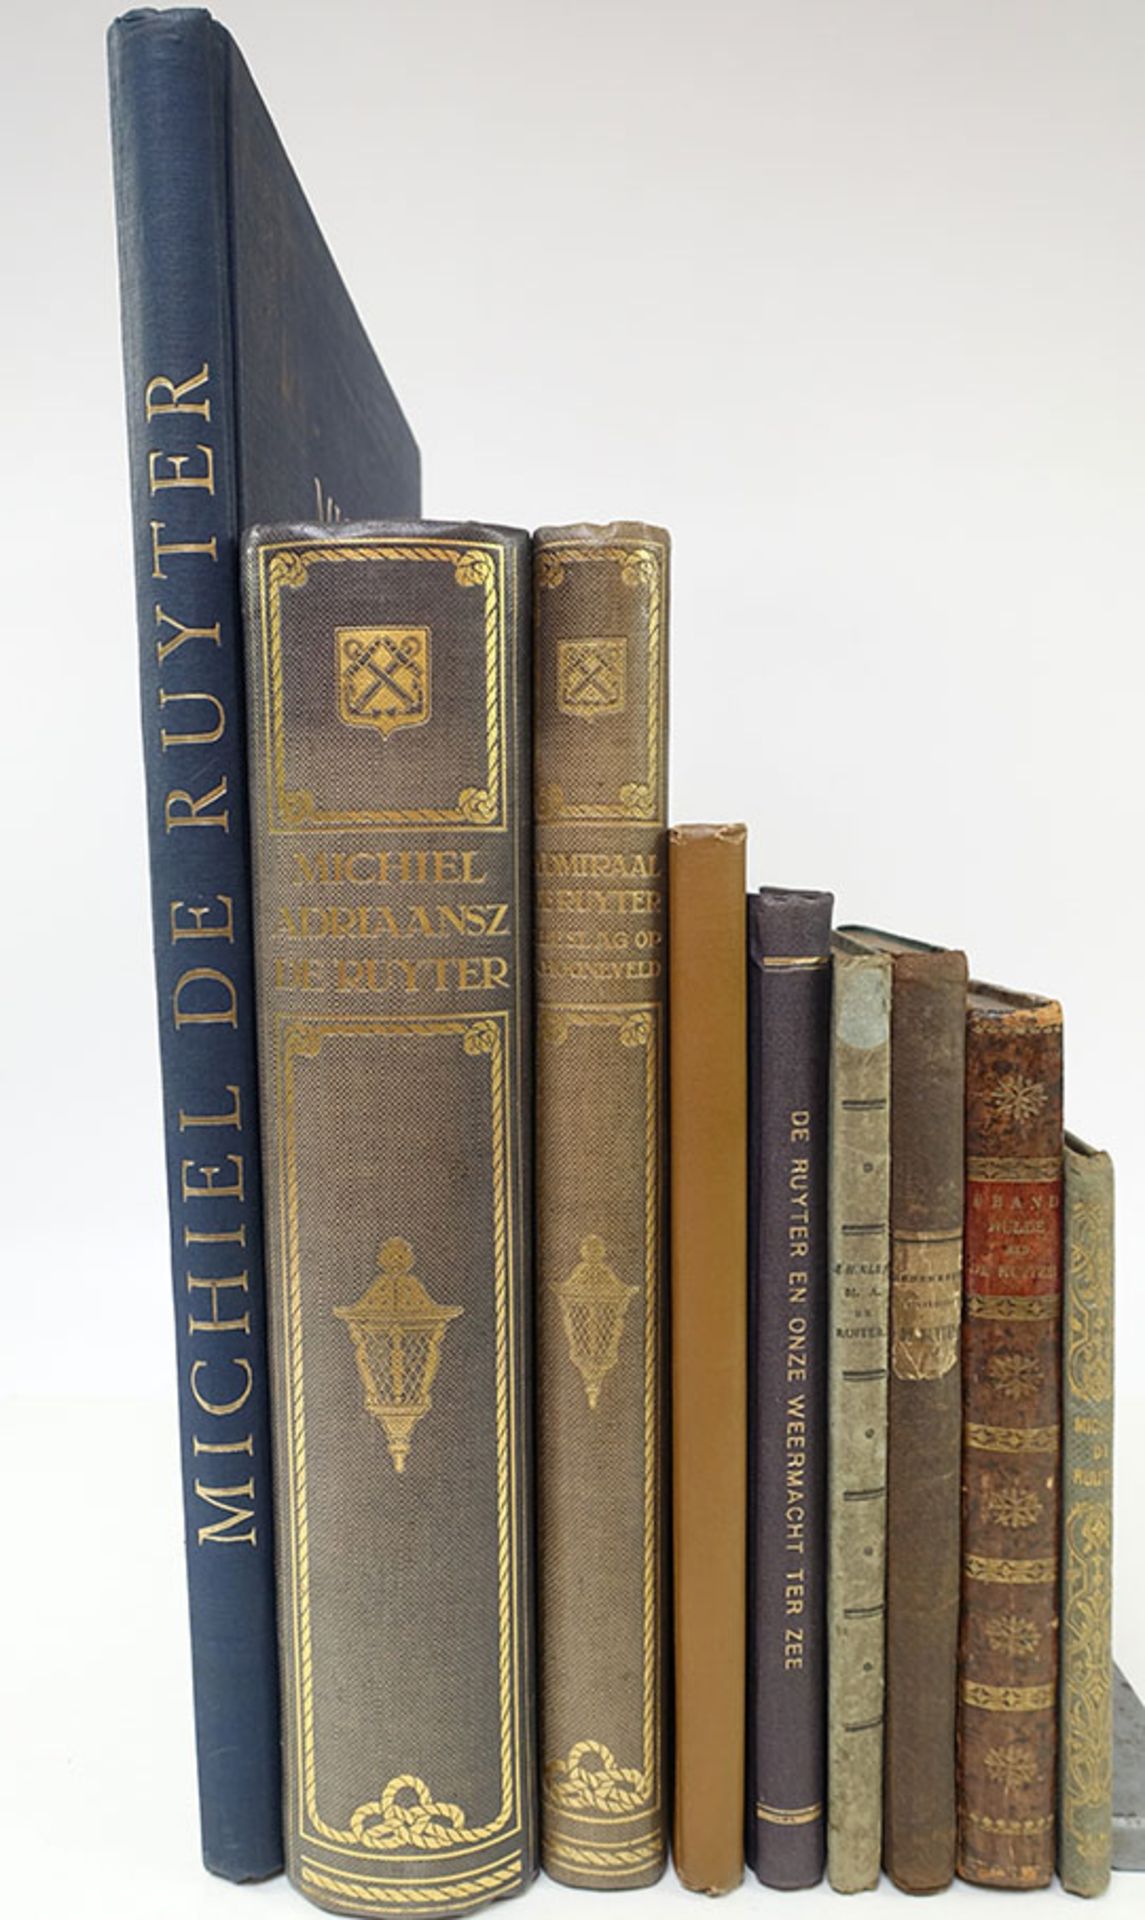 RUYTER -- COLLECTION of 9 works on Michiel Adriaansz. de Ruyter. 9 vols. Diff. sizes. Or. binds. (